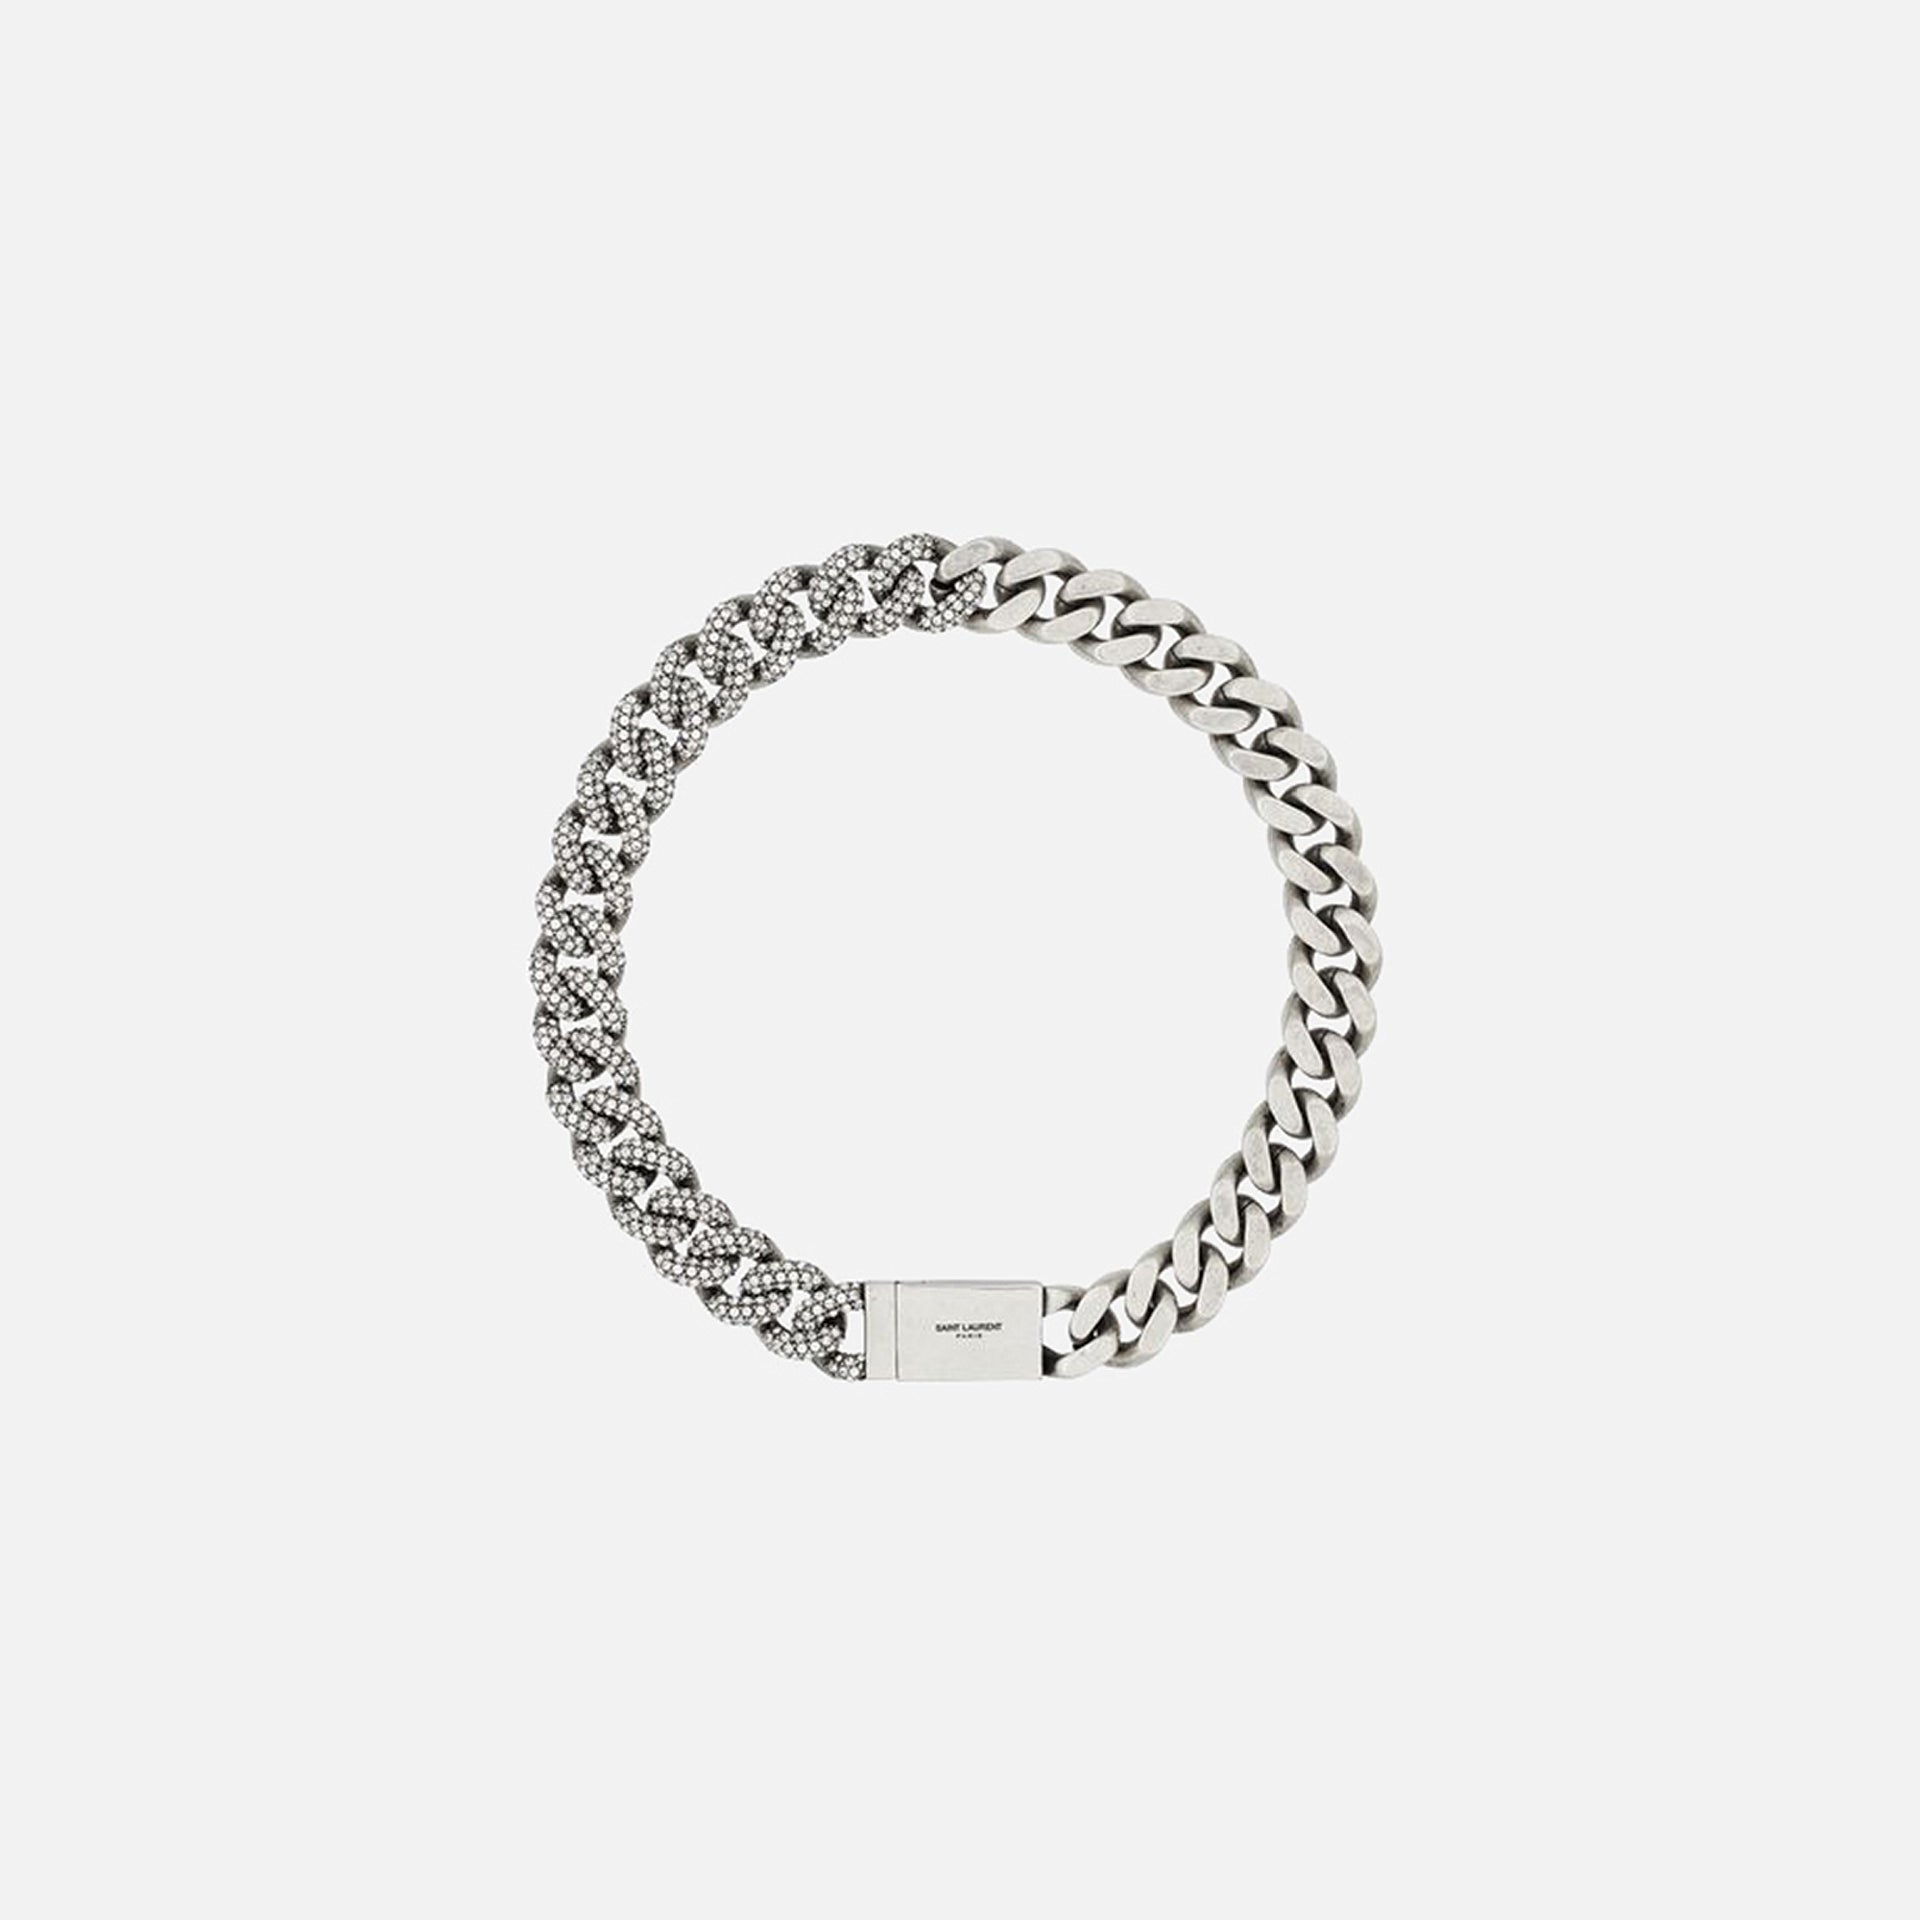 Saint Laurent Rhinestone Thick Curb Chain Necklace - Silver